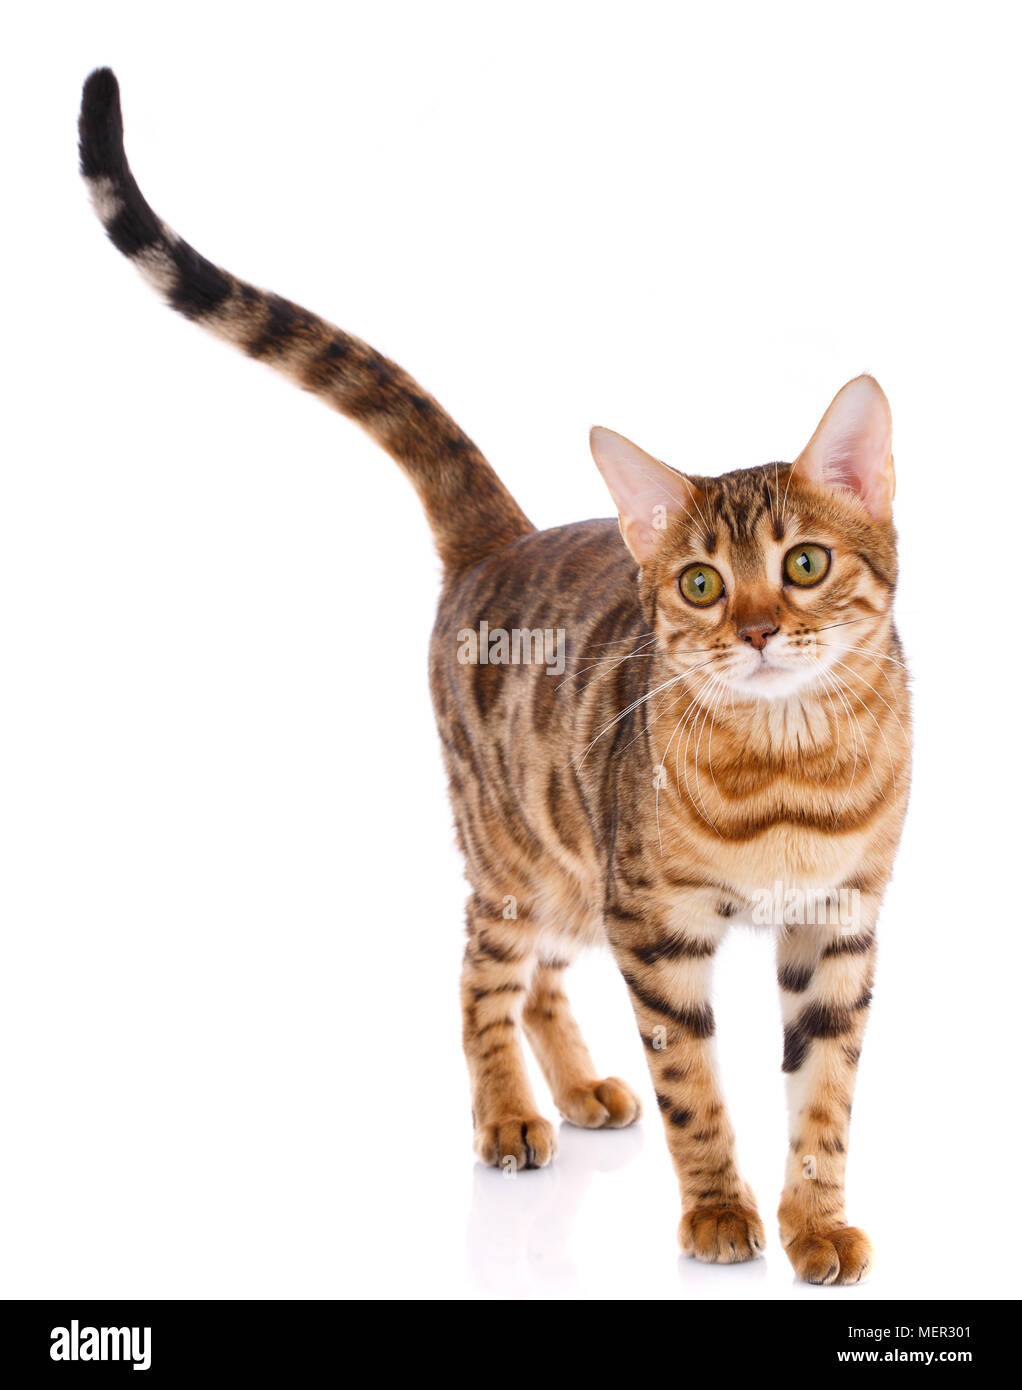 Bengal thoroughbred cat on a white background. Purebred cat. Stock Photo